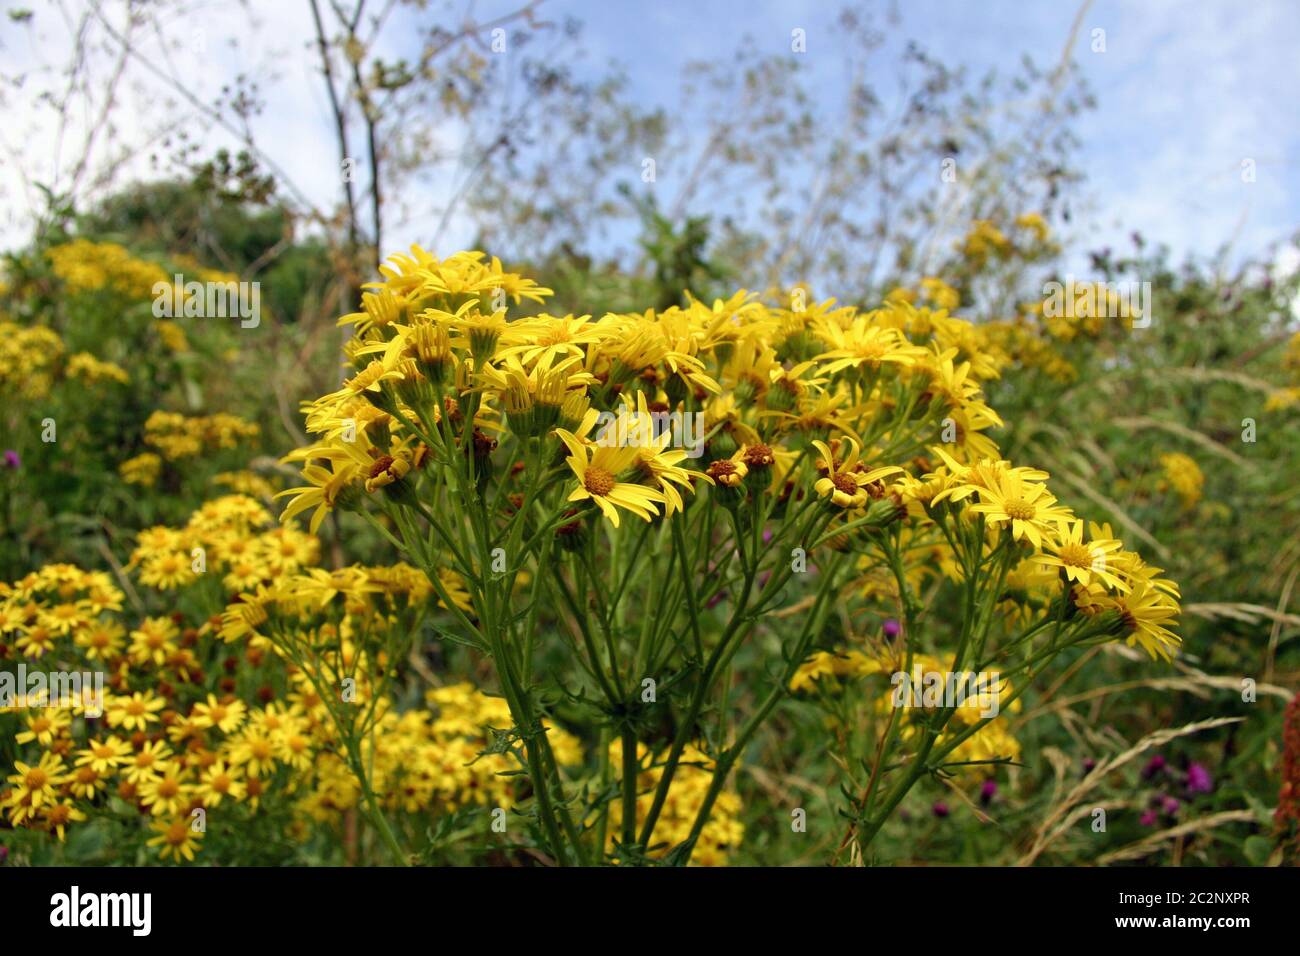 A stalk of yellow ragwort (Senecio sp.) flowers with a background of more of the same plants, grasses and blue sky with white cloud. Stock Photo